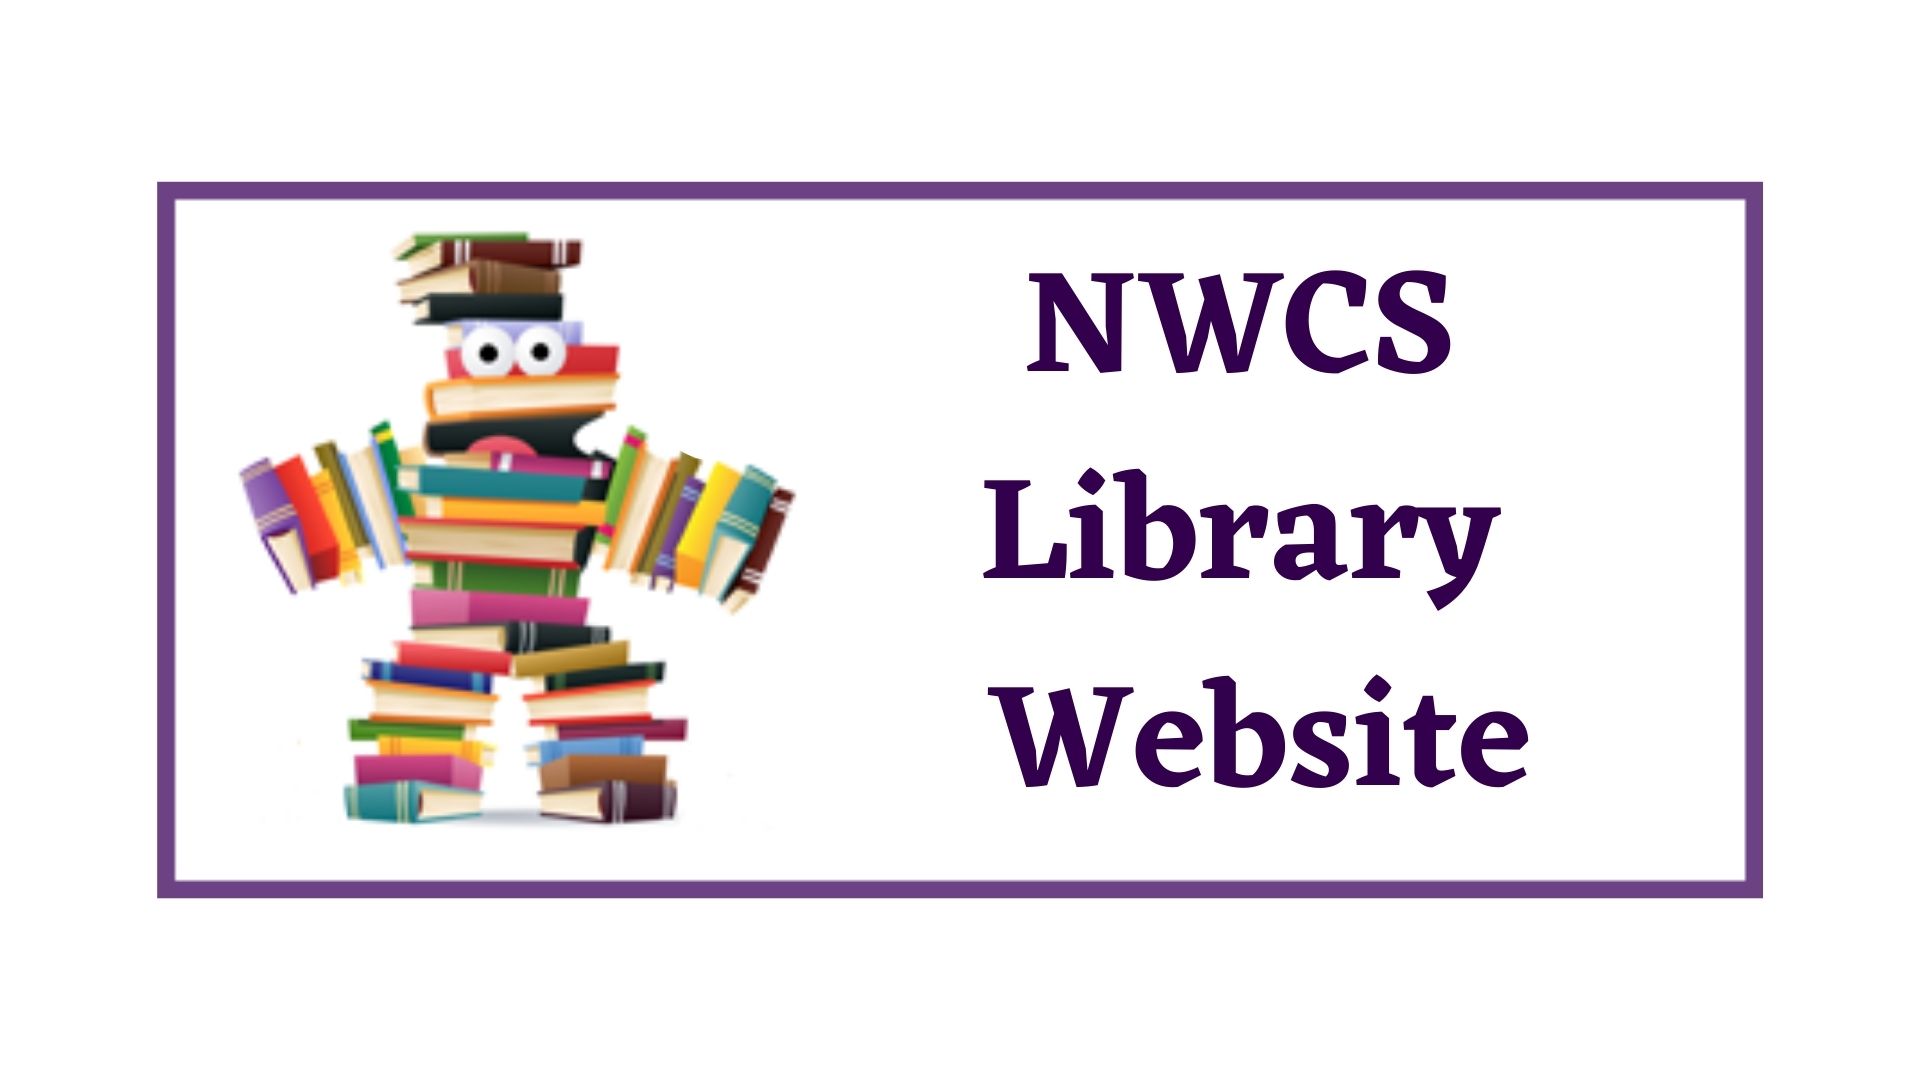 NWCS Library Website: https://sites.google.com/northwarrencsd.org/library